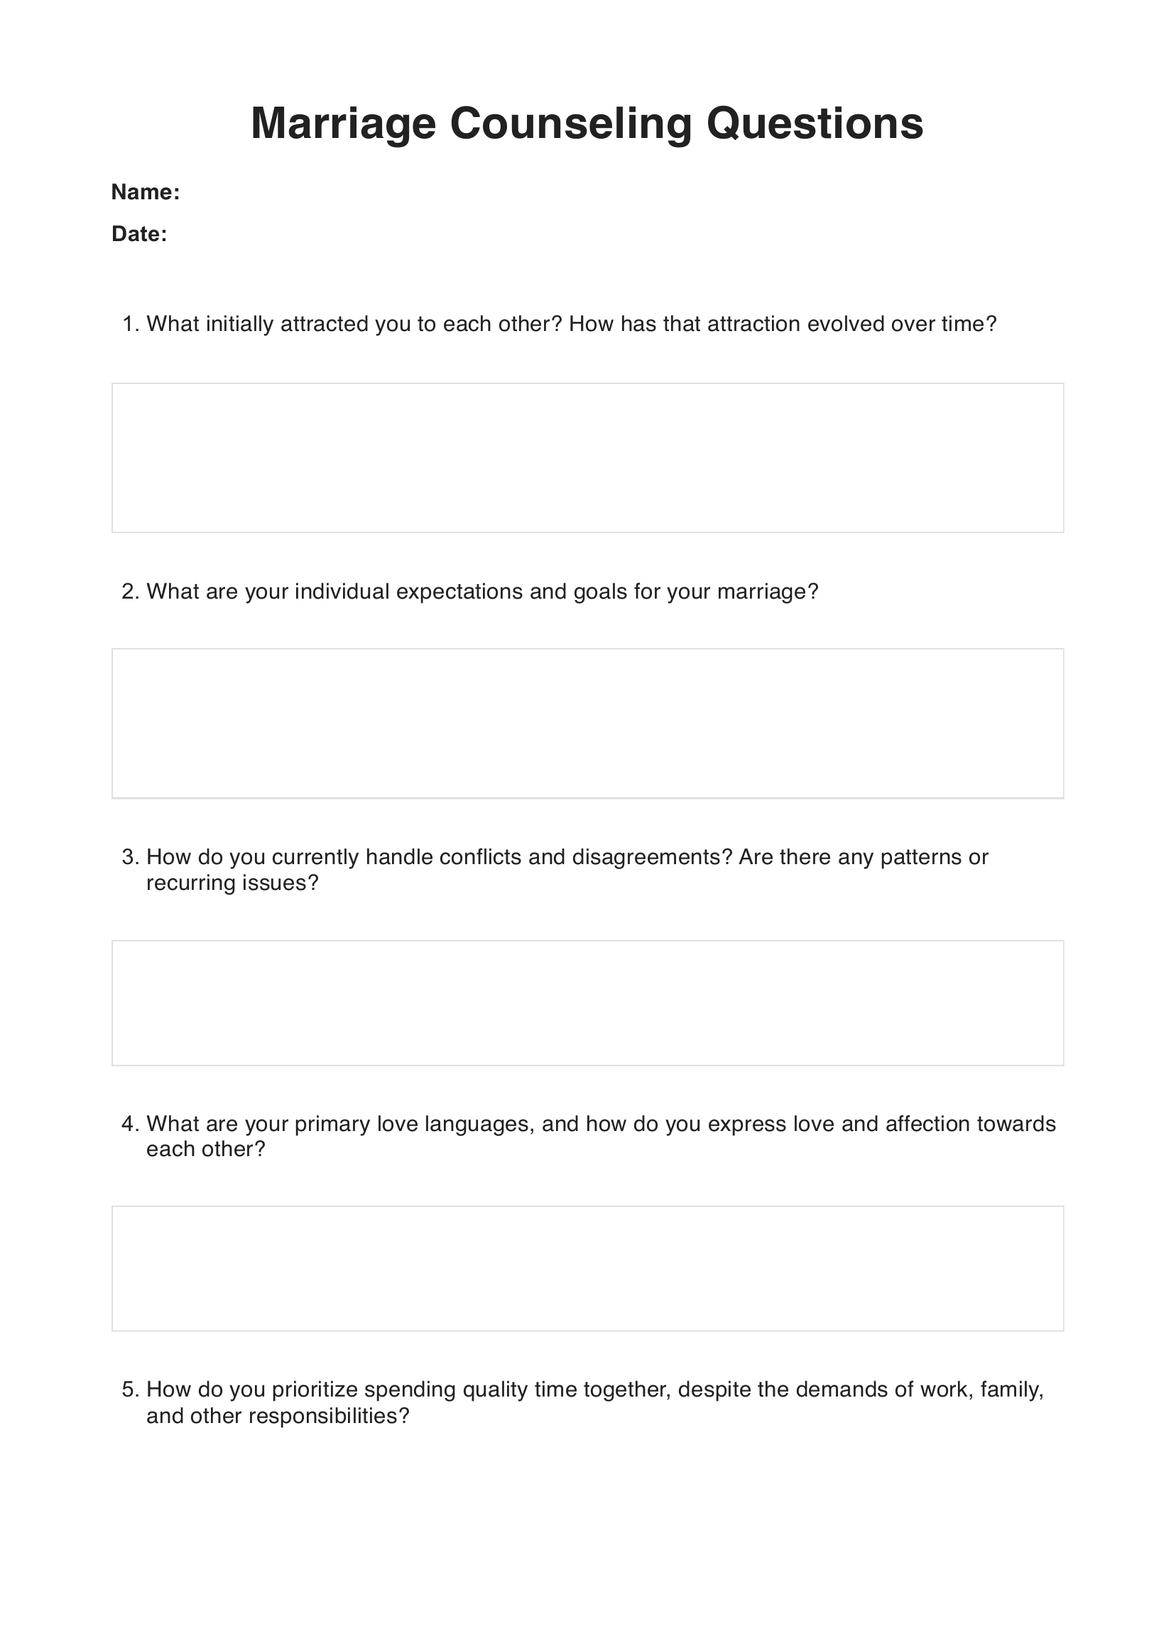 Marriage Counseling Questions PDF Example